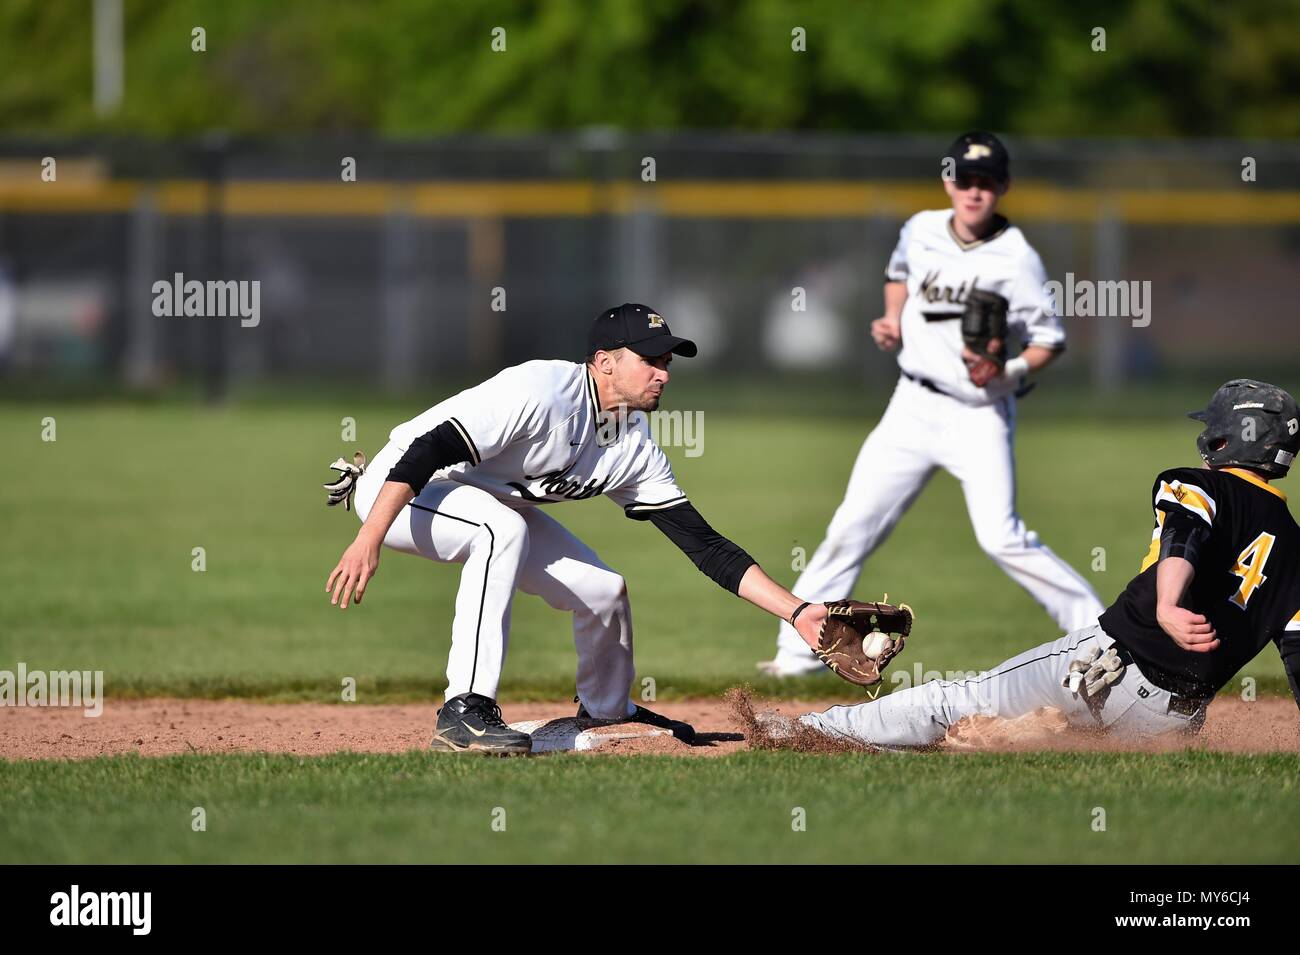 Middle infielder accepting a late throw from the catcher as an opposing runners slides into second base on a stolen base attempt. USA. Stock Photo